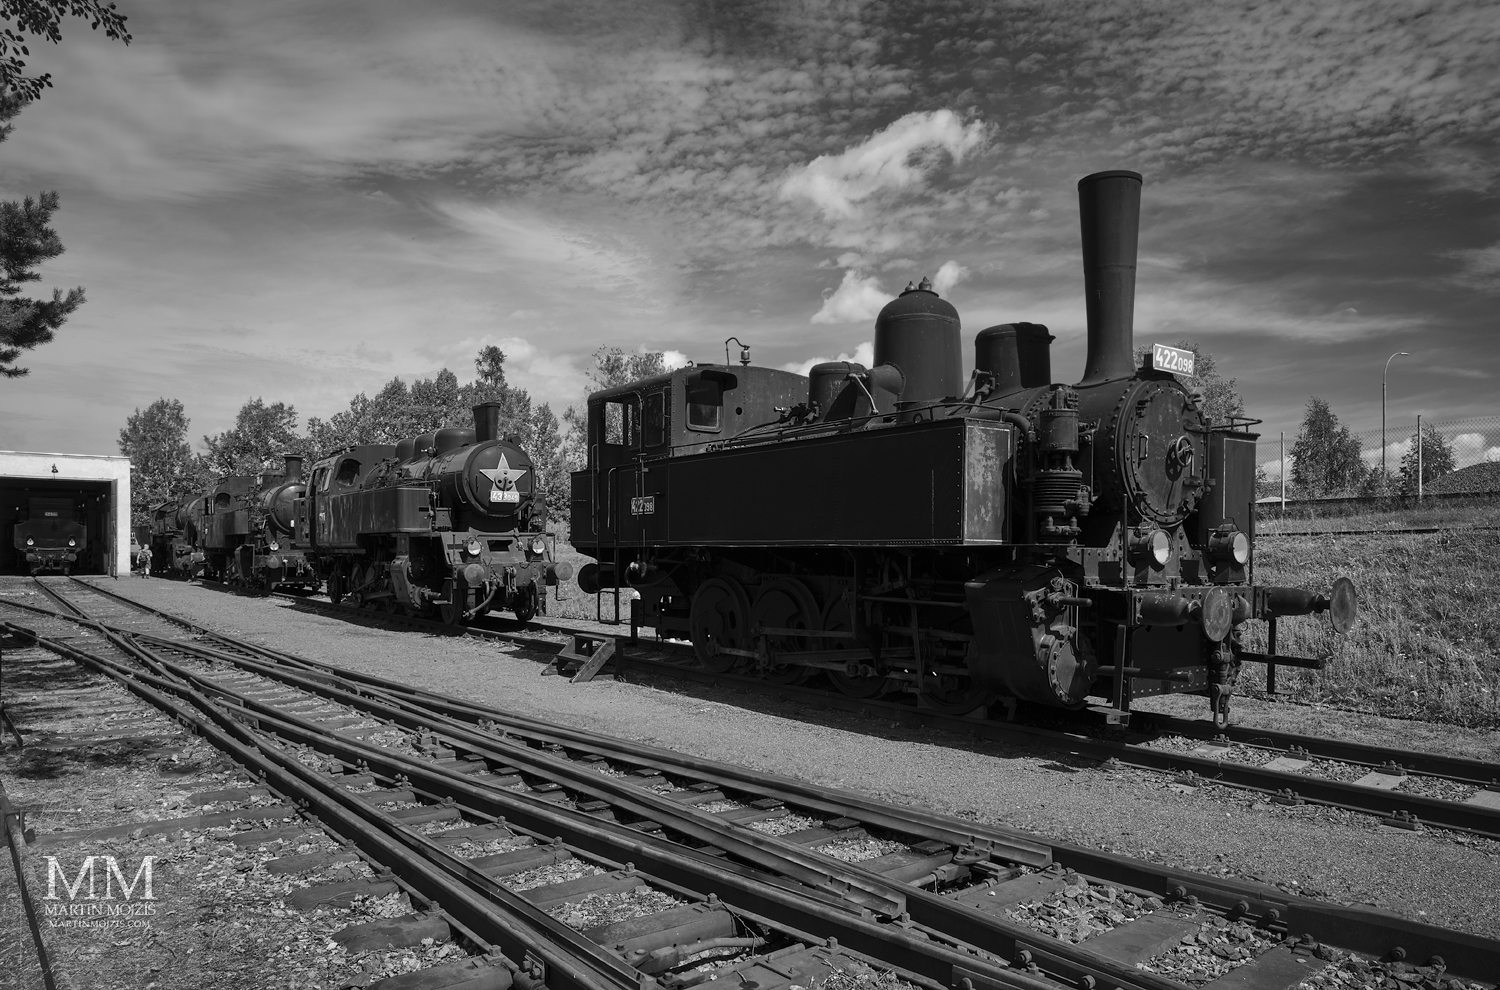 Steam locomotives on the tracks in the summer afternoon. Fine art photograph SERENITY OF THE SUMMER AFTERNOON II., photographed by Martin Mojzis.